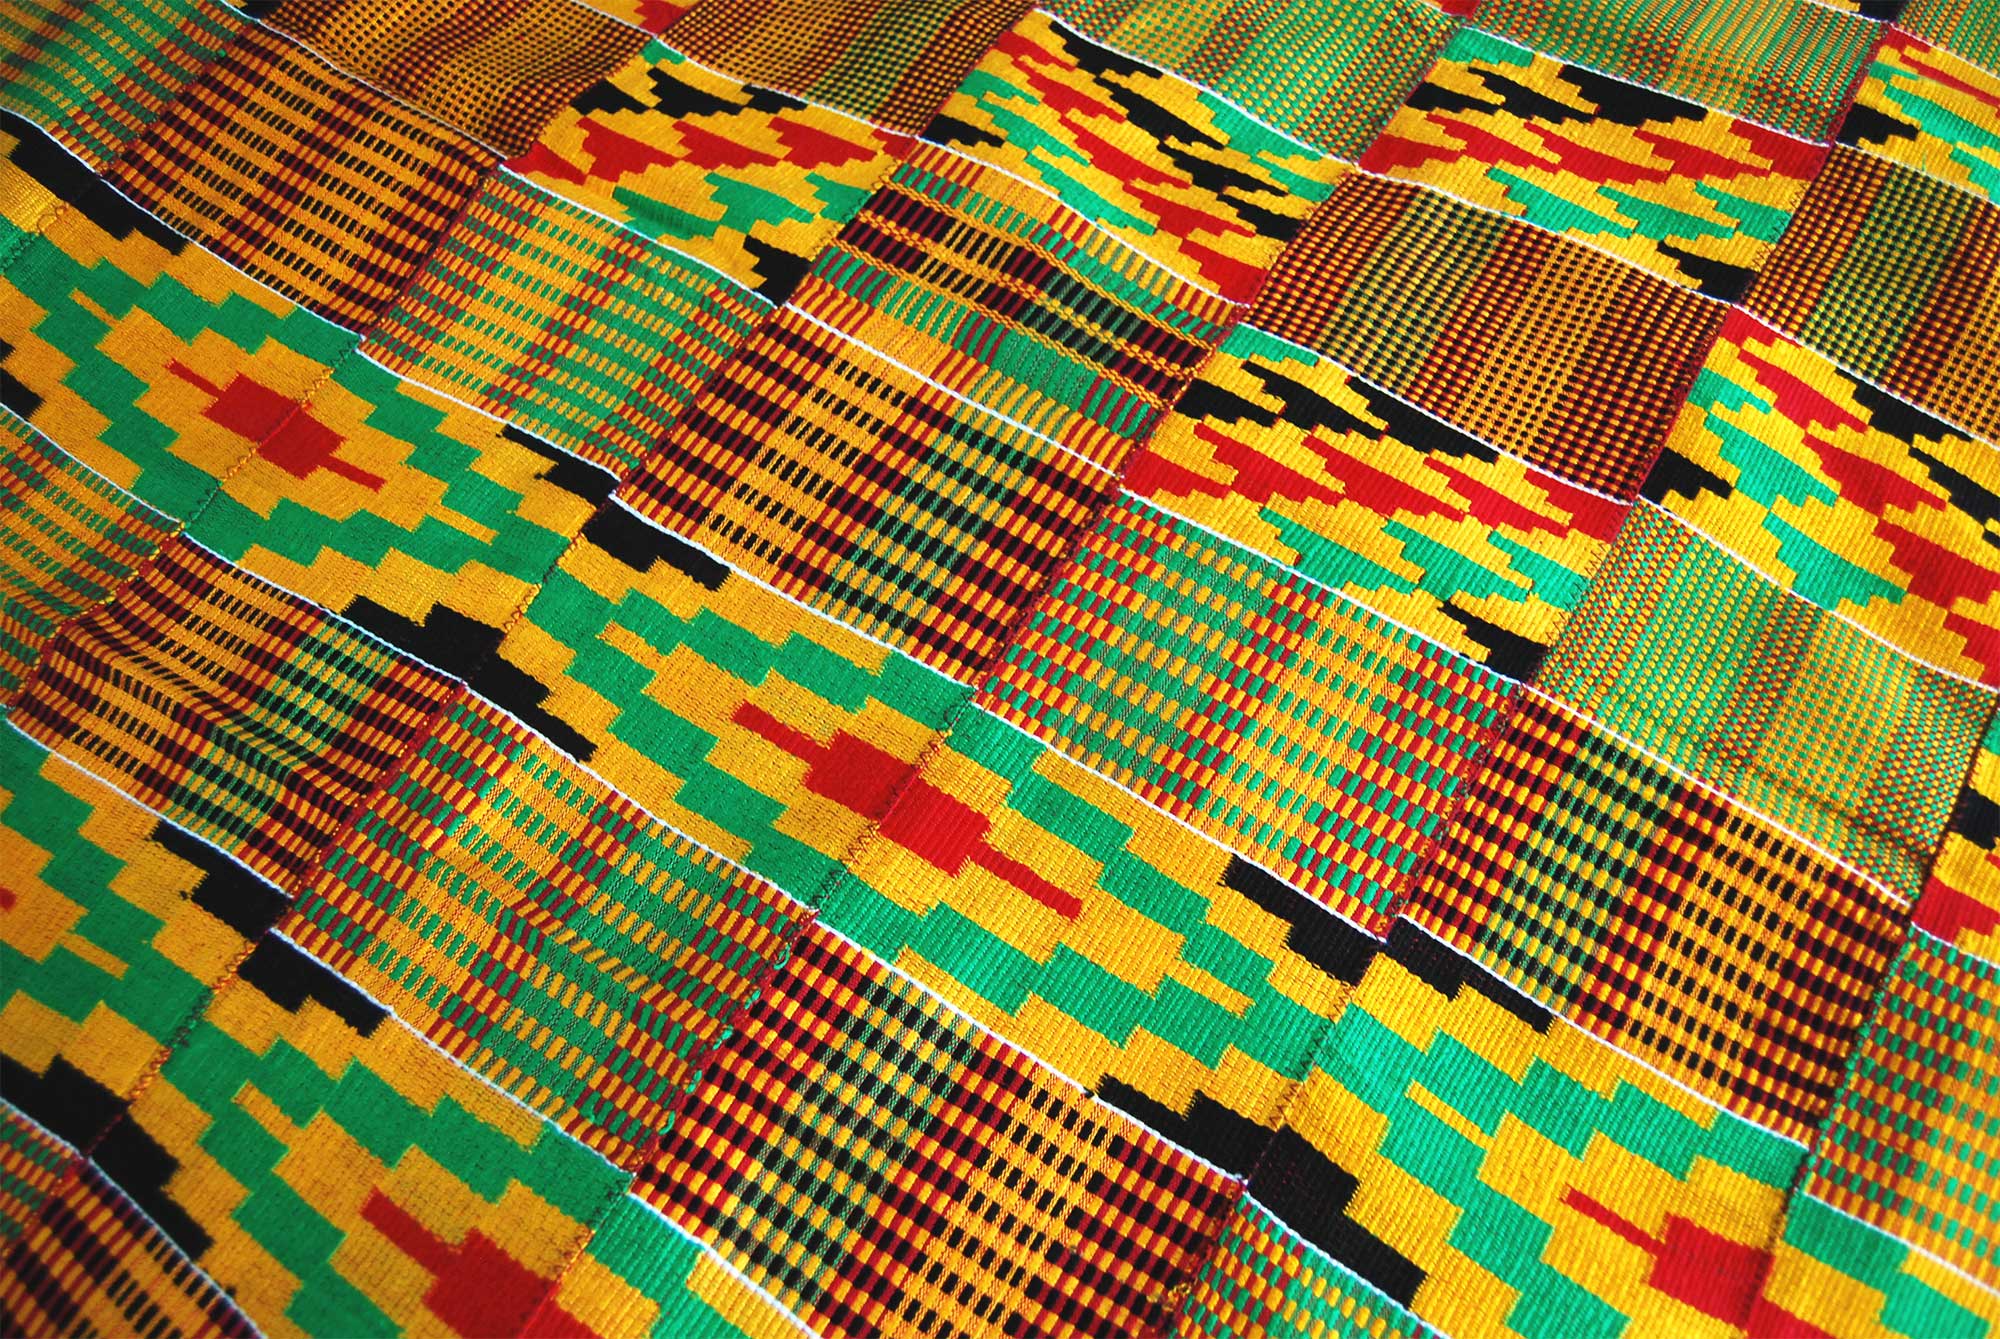 Wrapped in Pride” Exhibition of African Kente Cloth to Show in